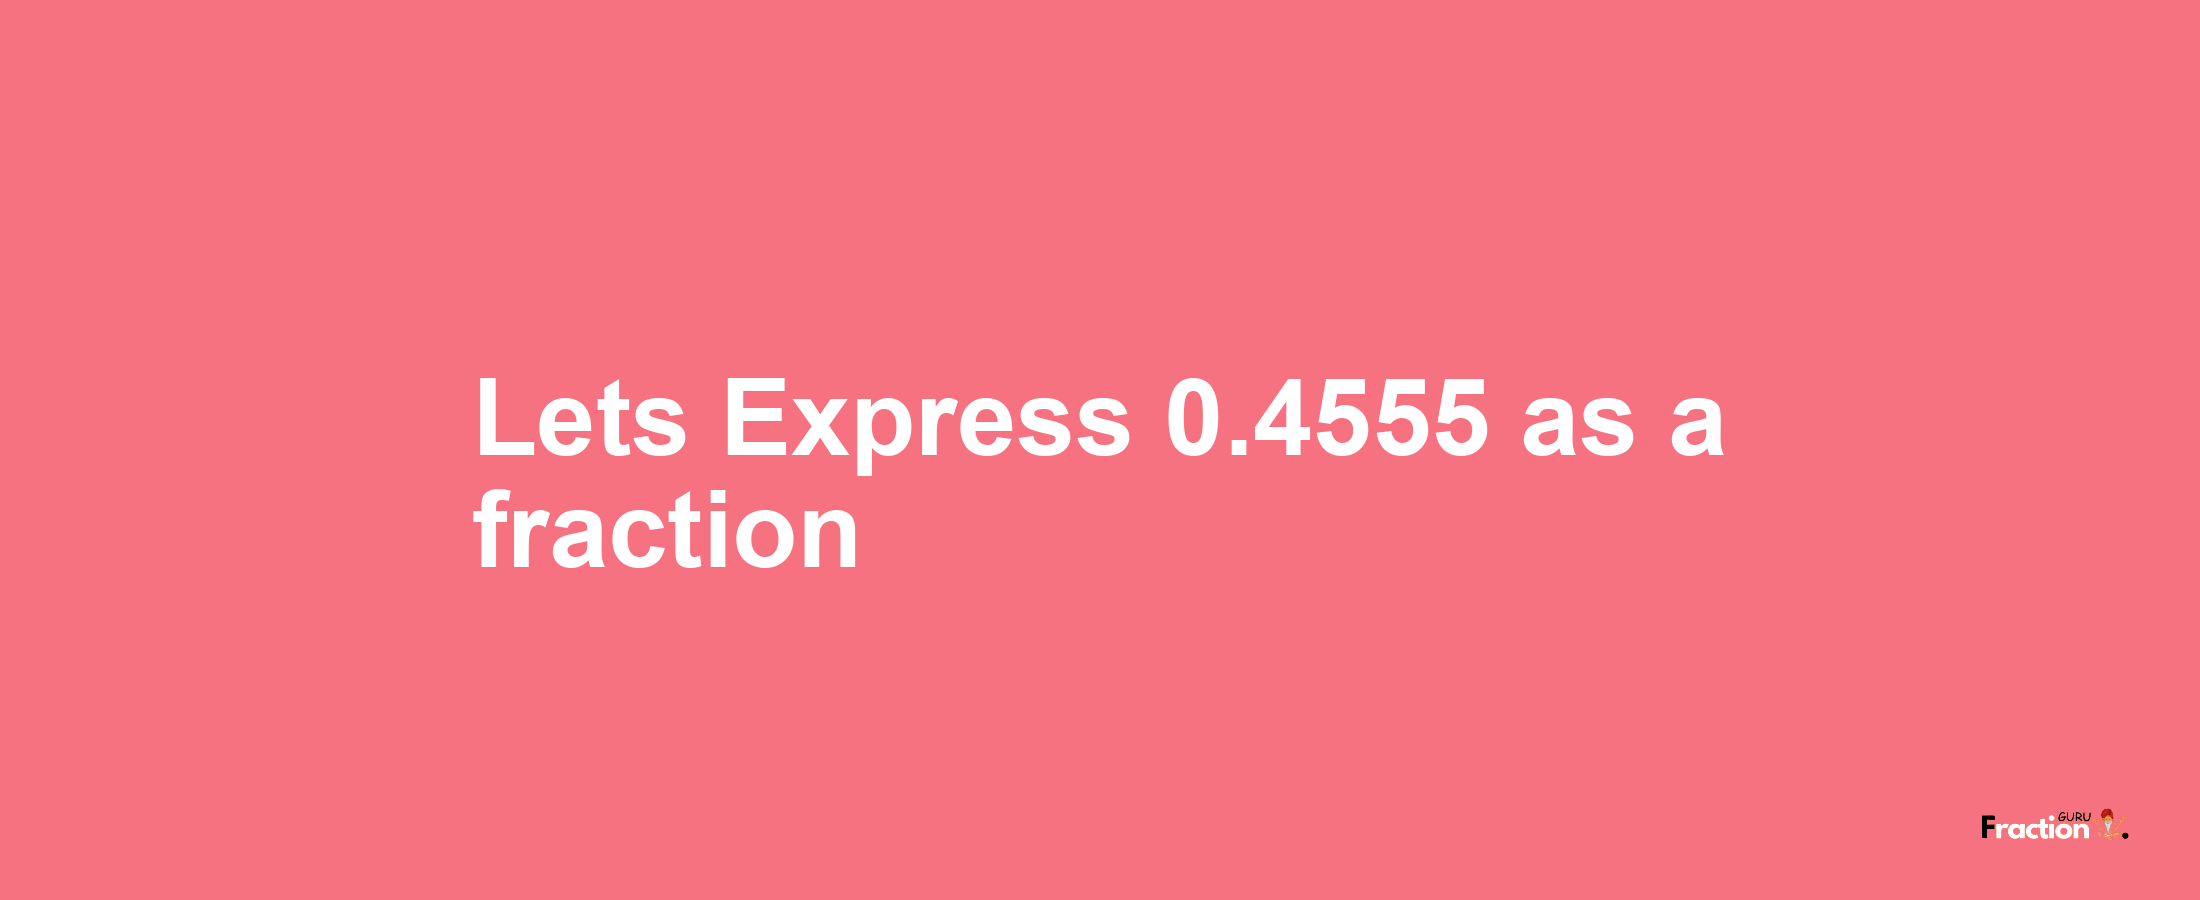 Lets Express 0.4555 as afraction